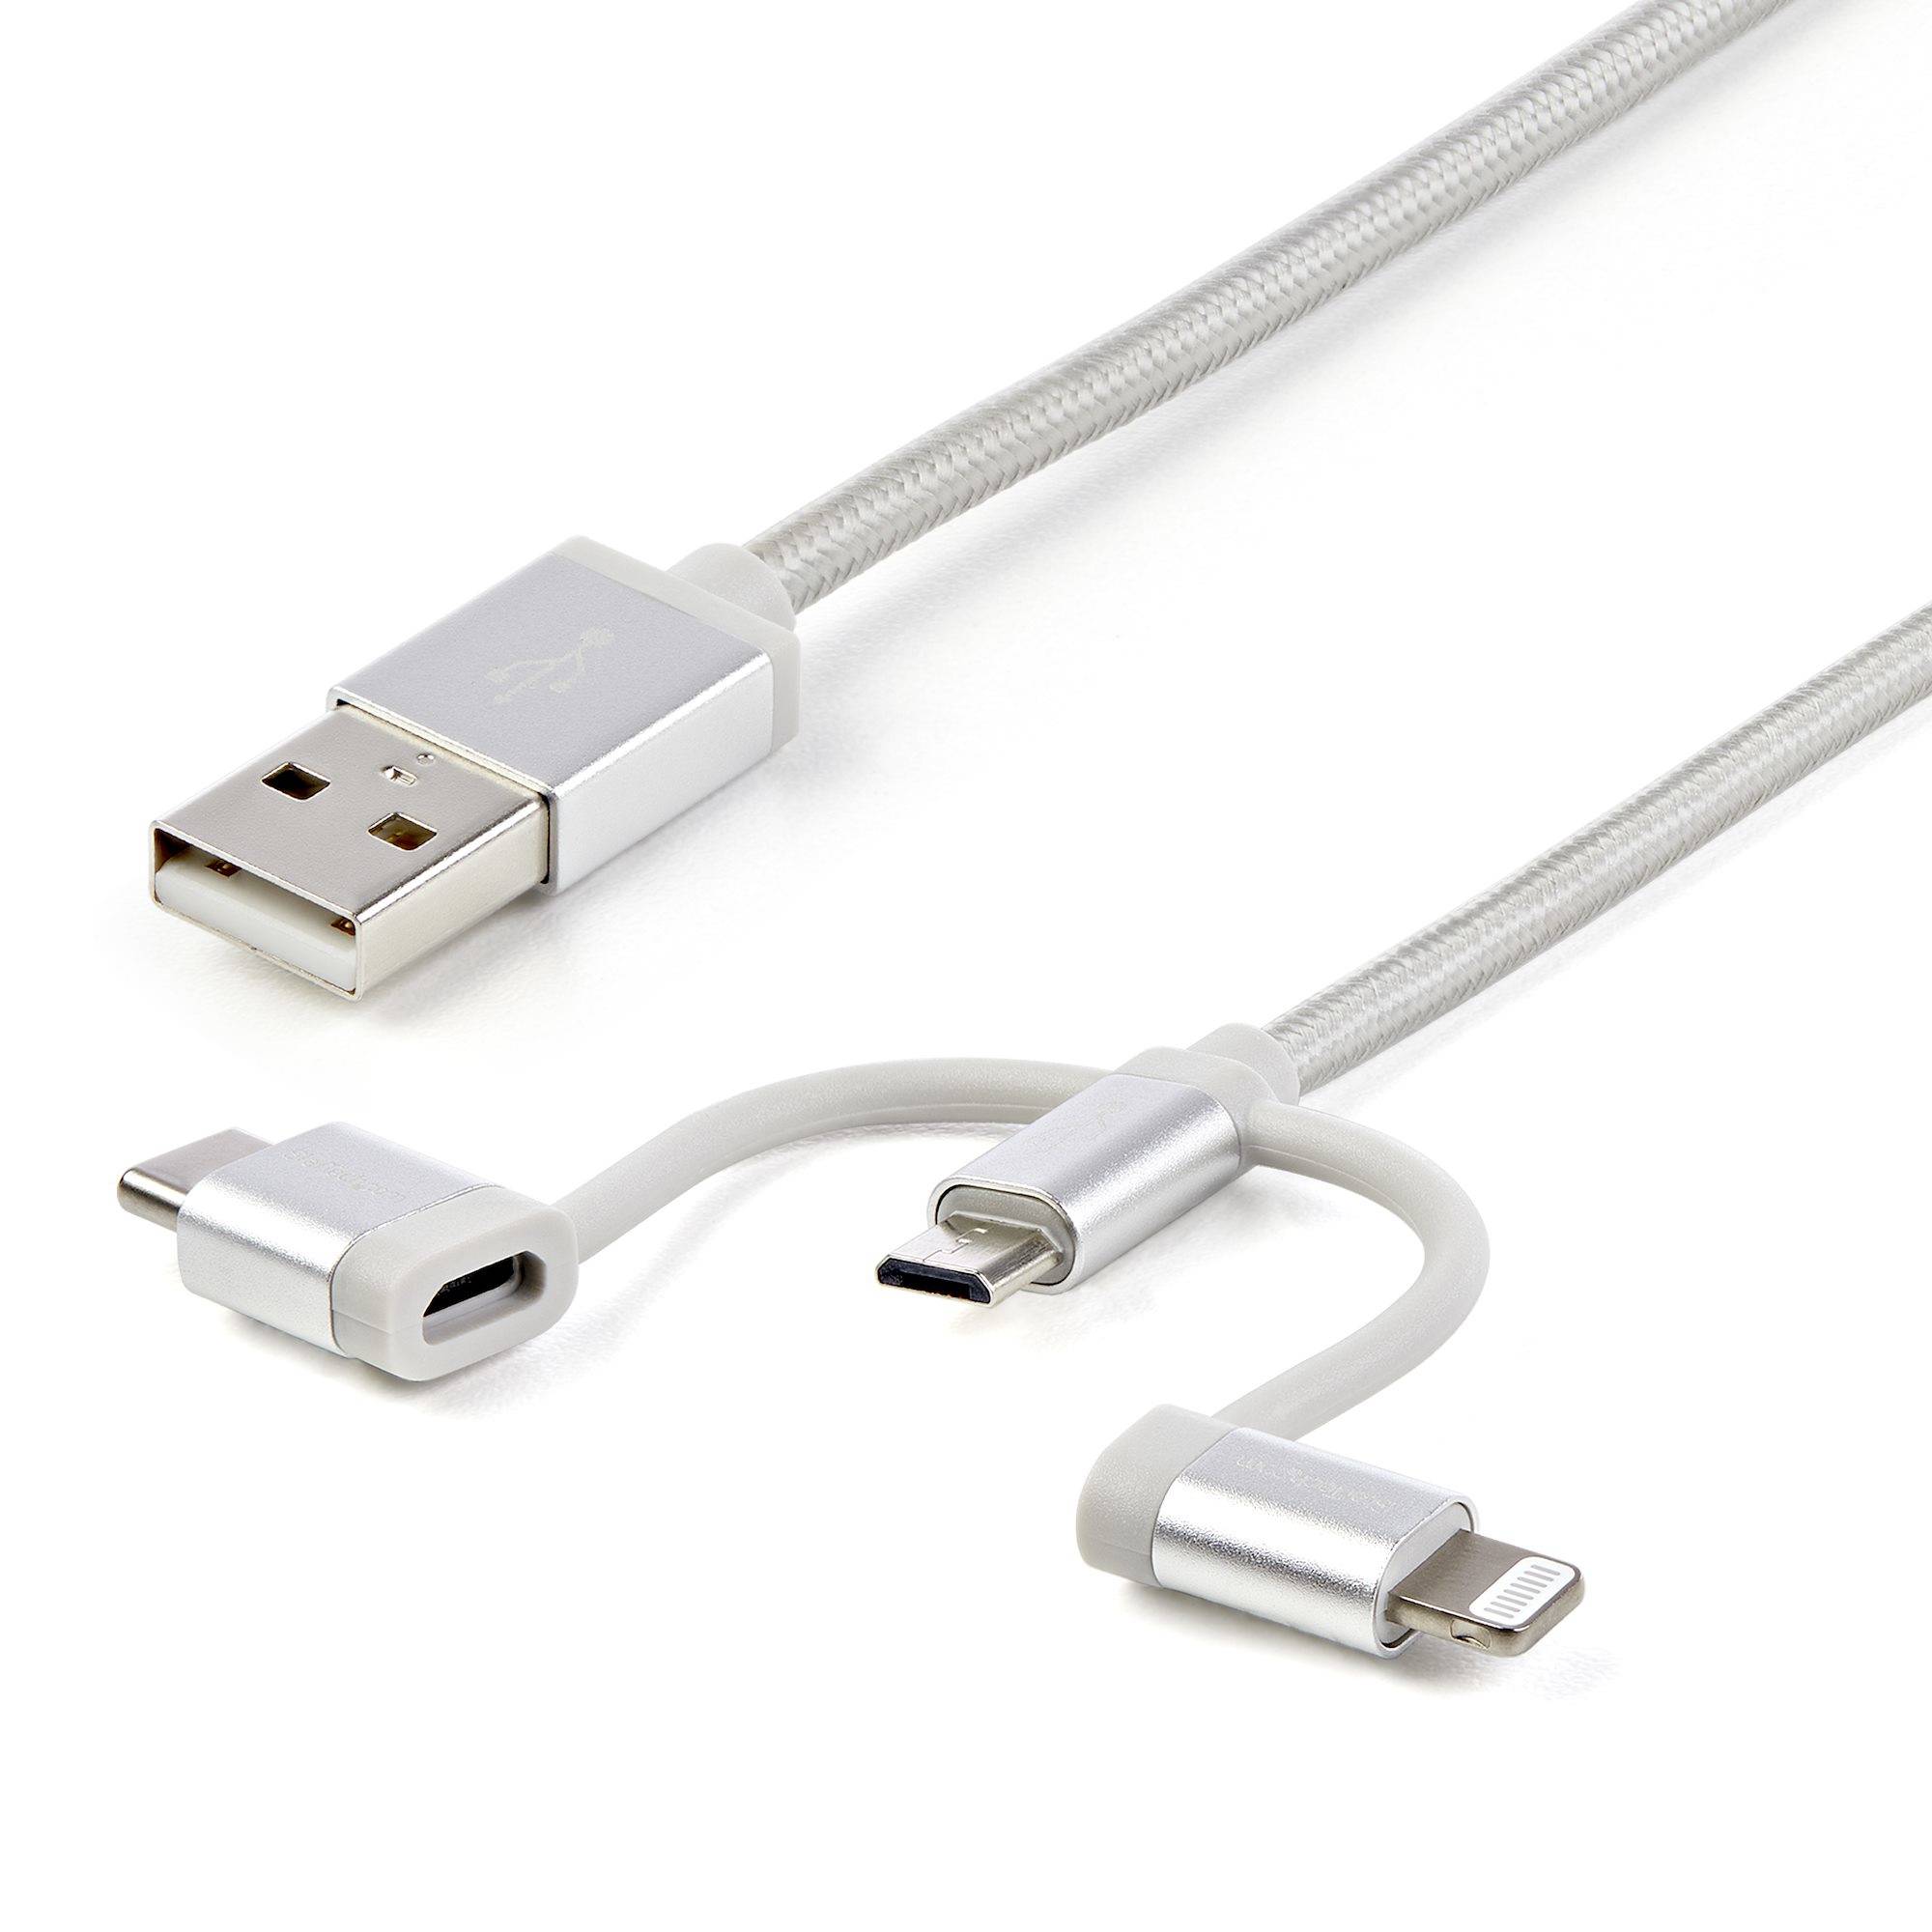 Rca Informatique - Image du produit : 1M 3 IN 1 CHARGER - LIGHTNING USB C OR MICRO-USB - BRAIDED